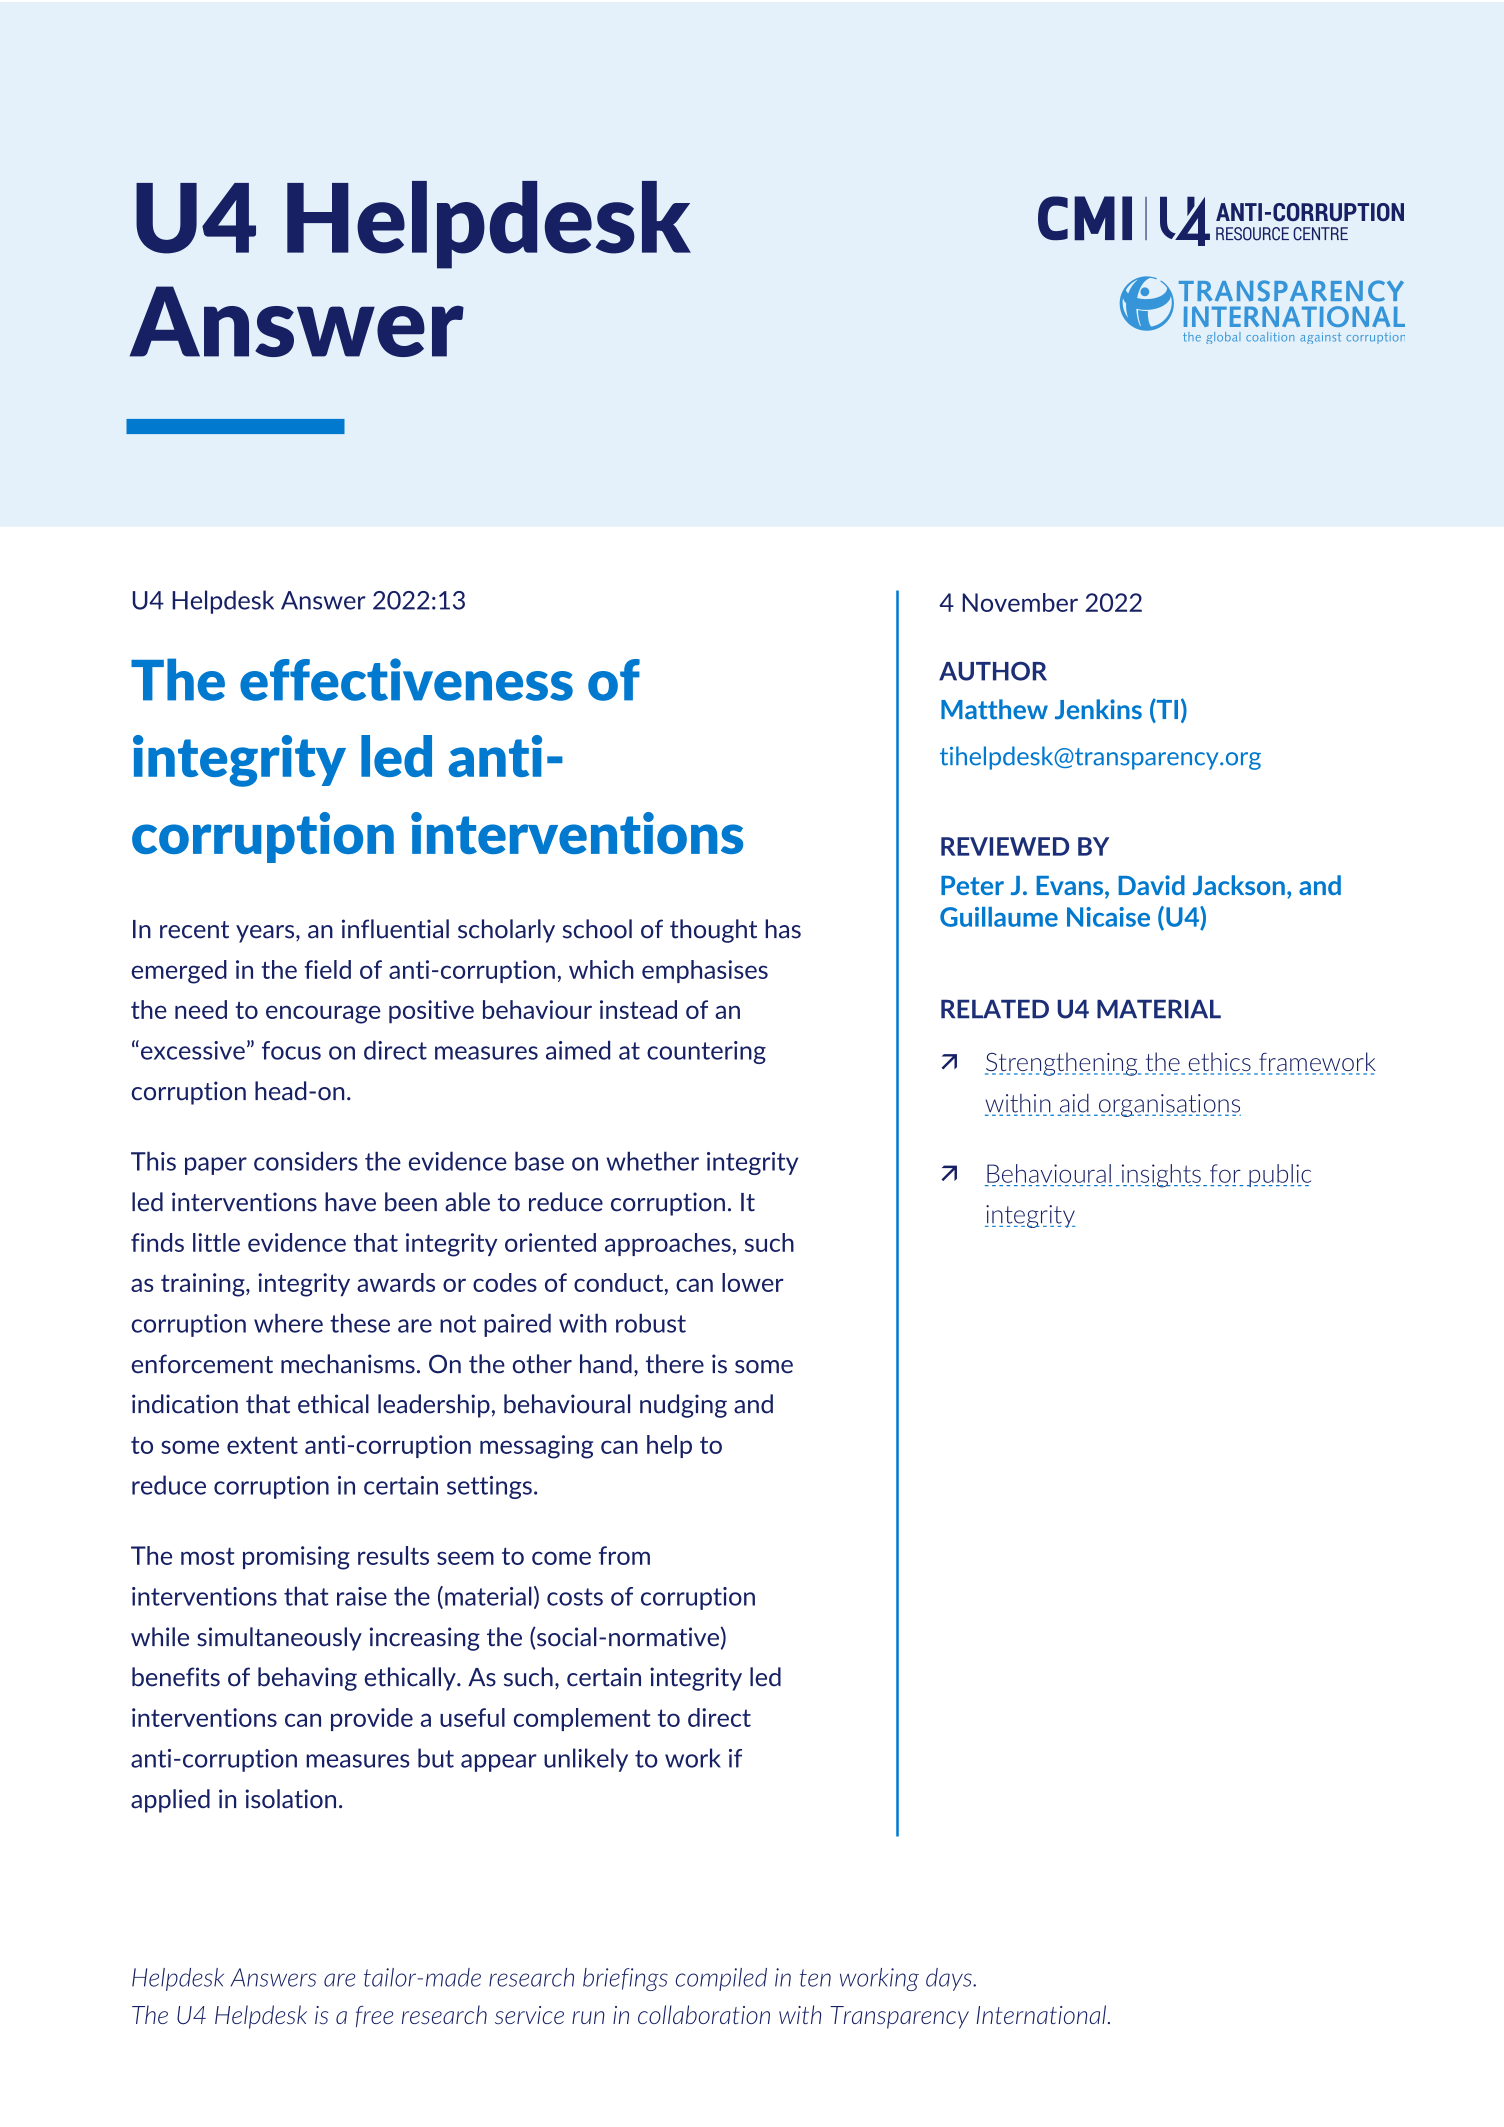 The effectiveness of integrity led anti-corruption interventions